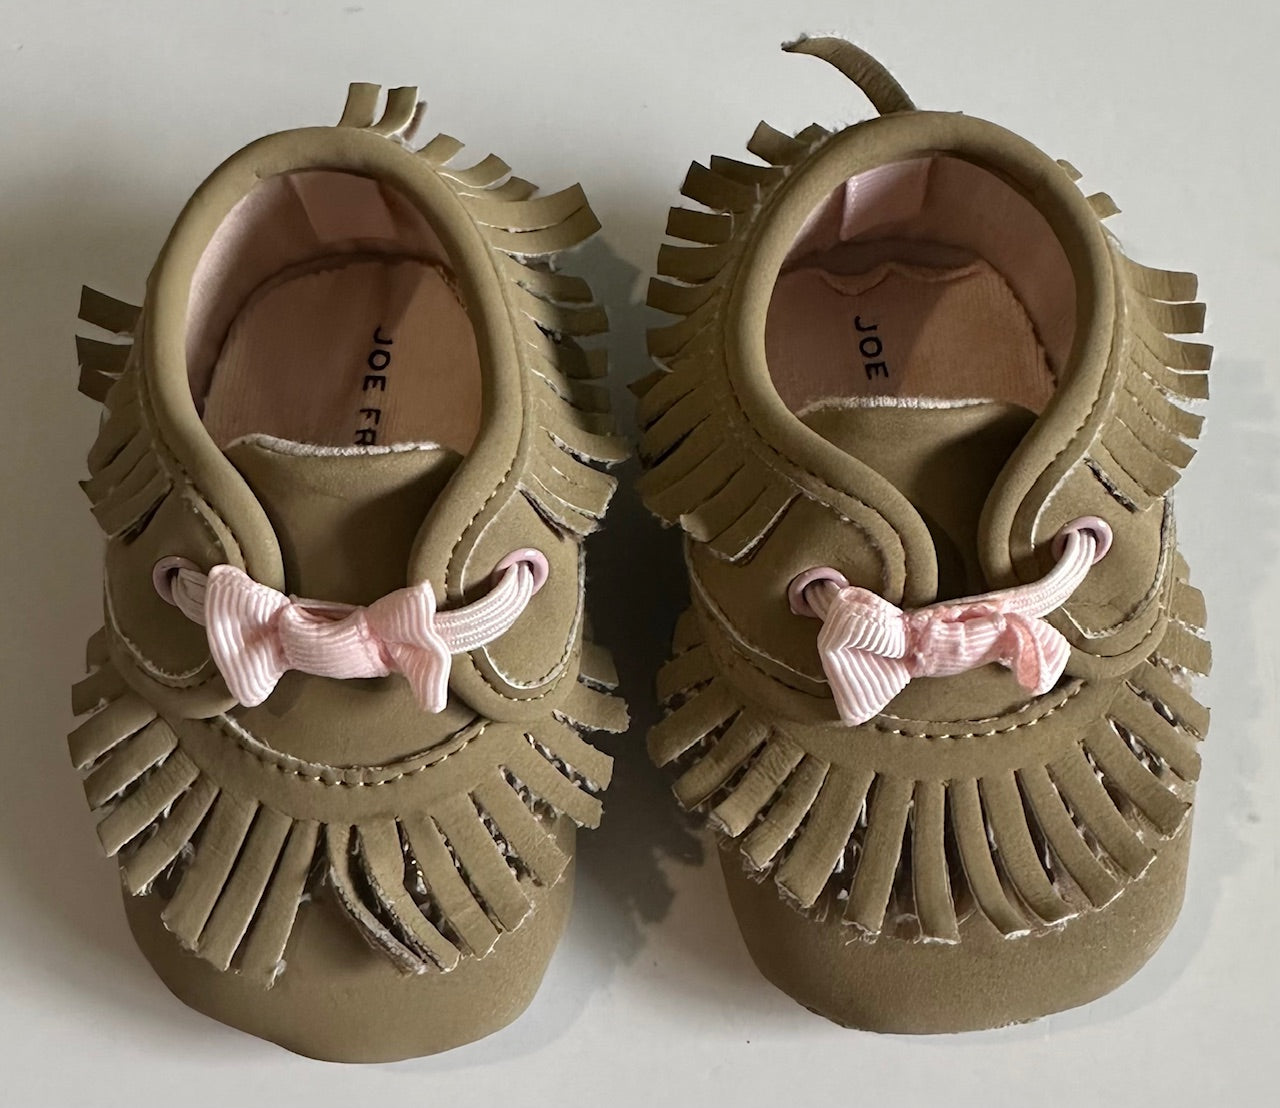 Joe Fresh, Tan Fringe Shoes with Pale Pink Bow - Size 1T